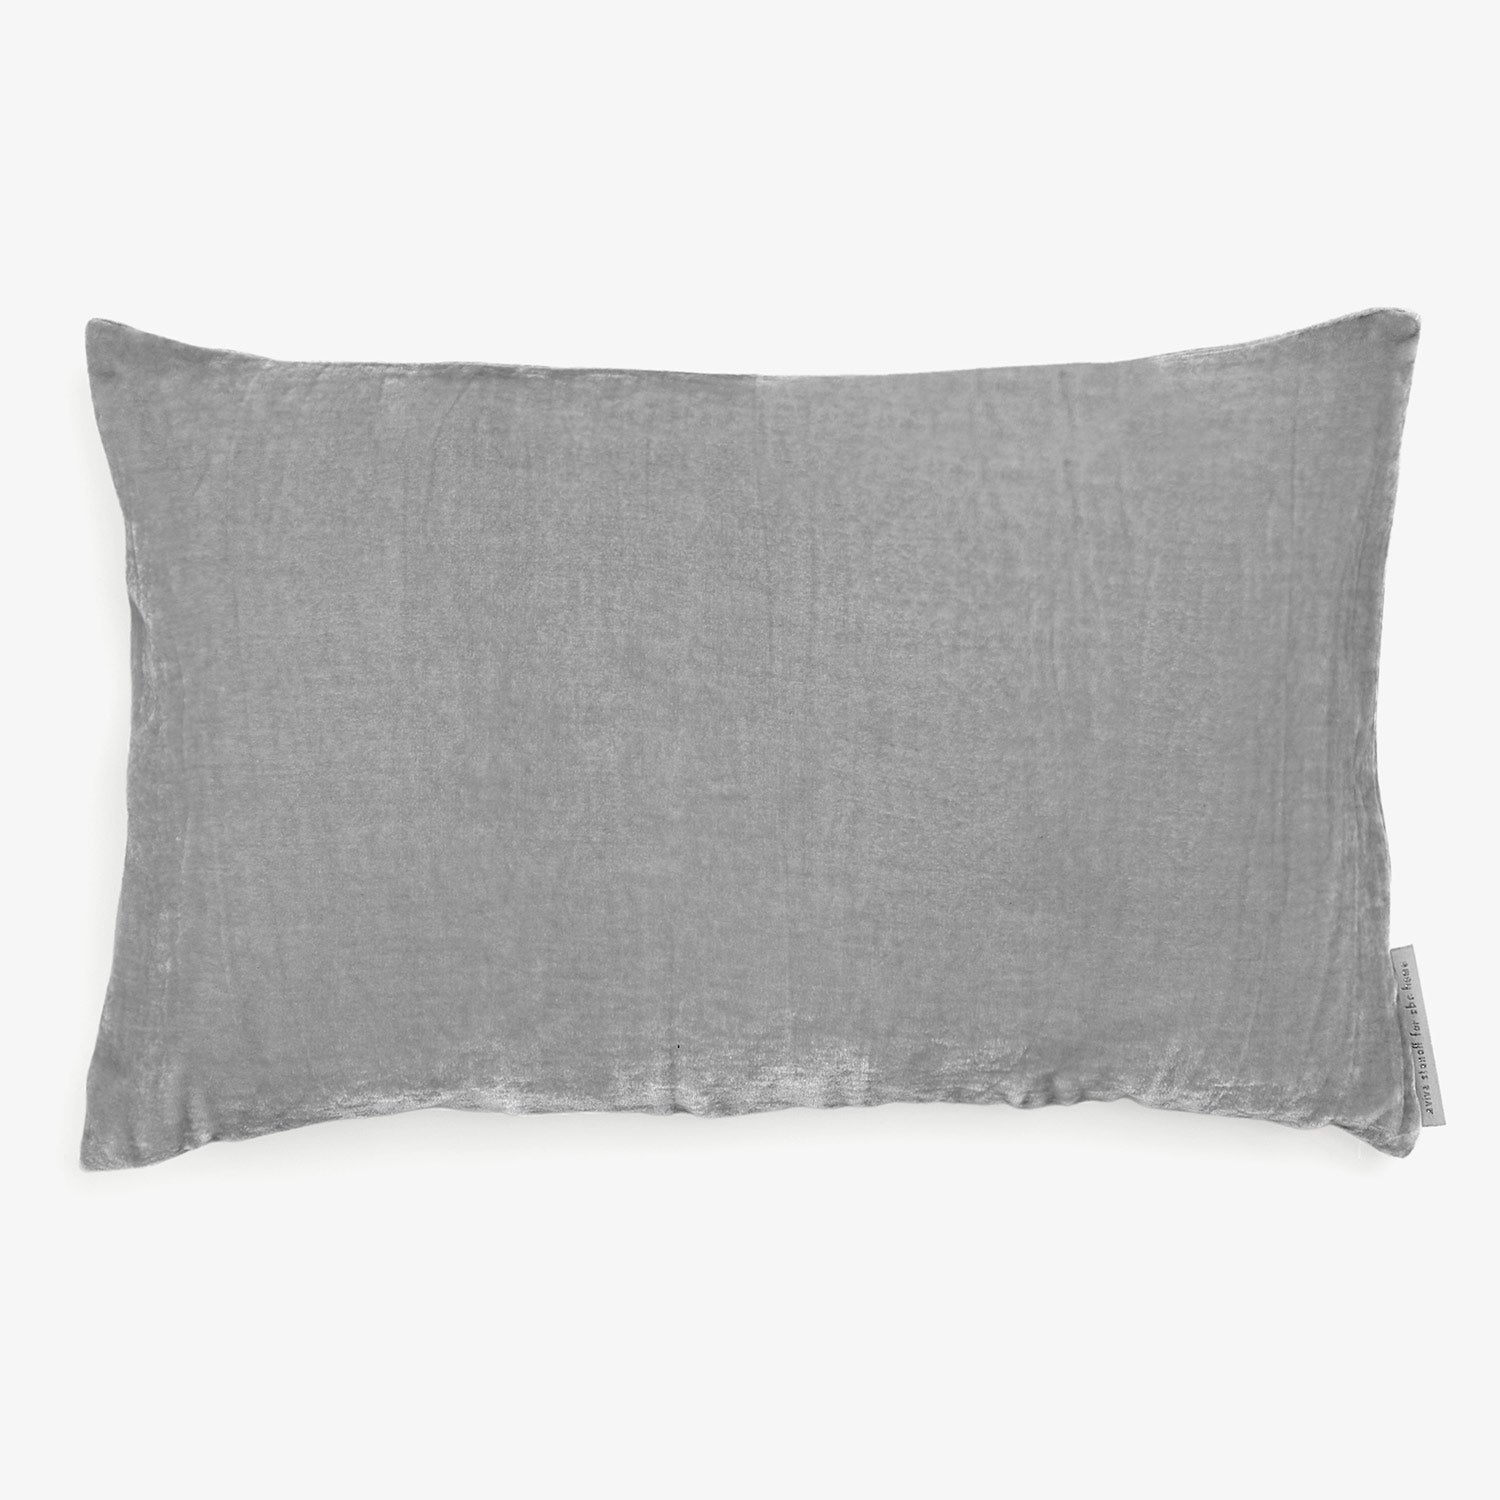 Rectangular gray linen pillow with soft, textured fabric cover and label.